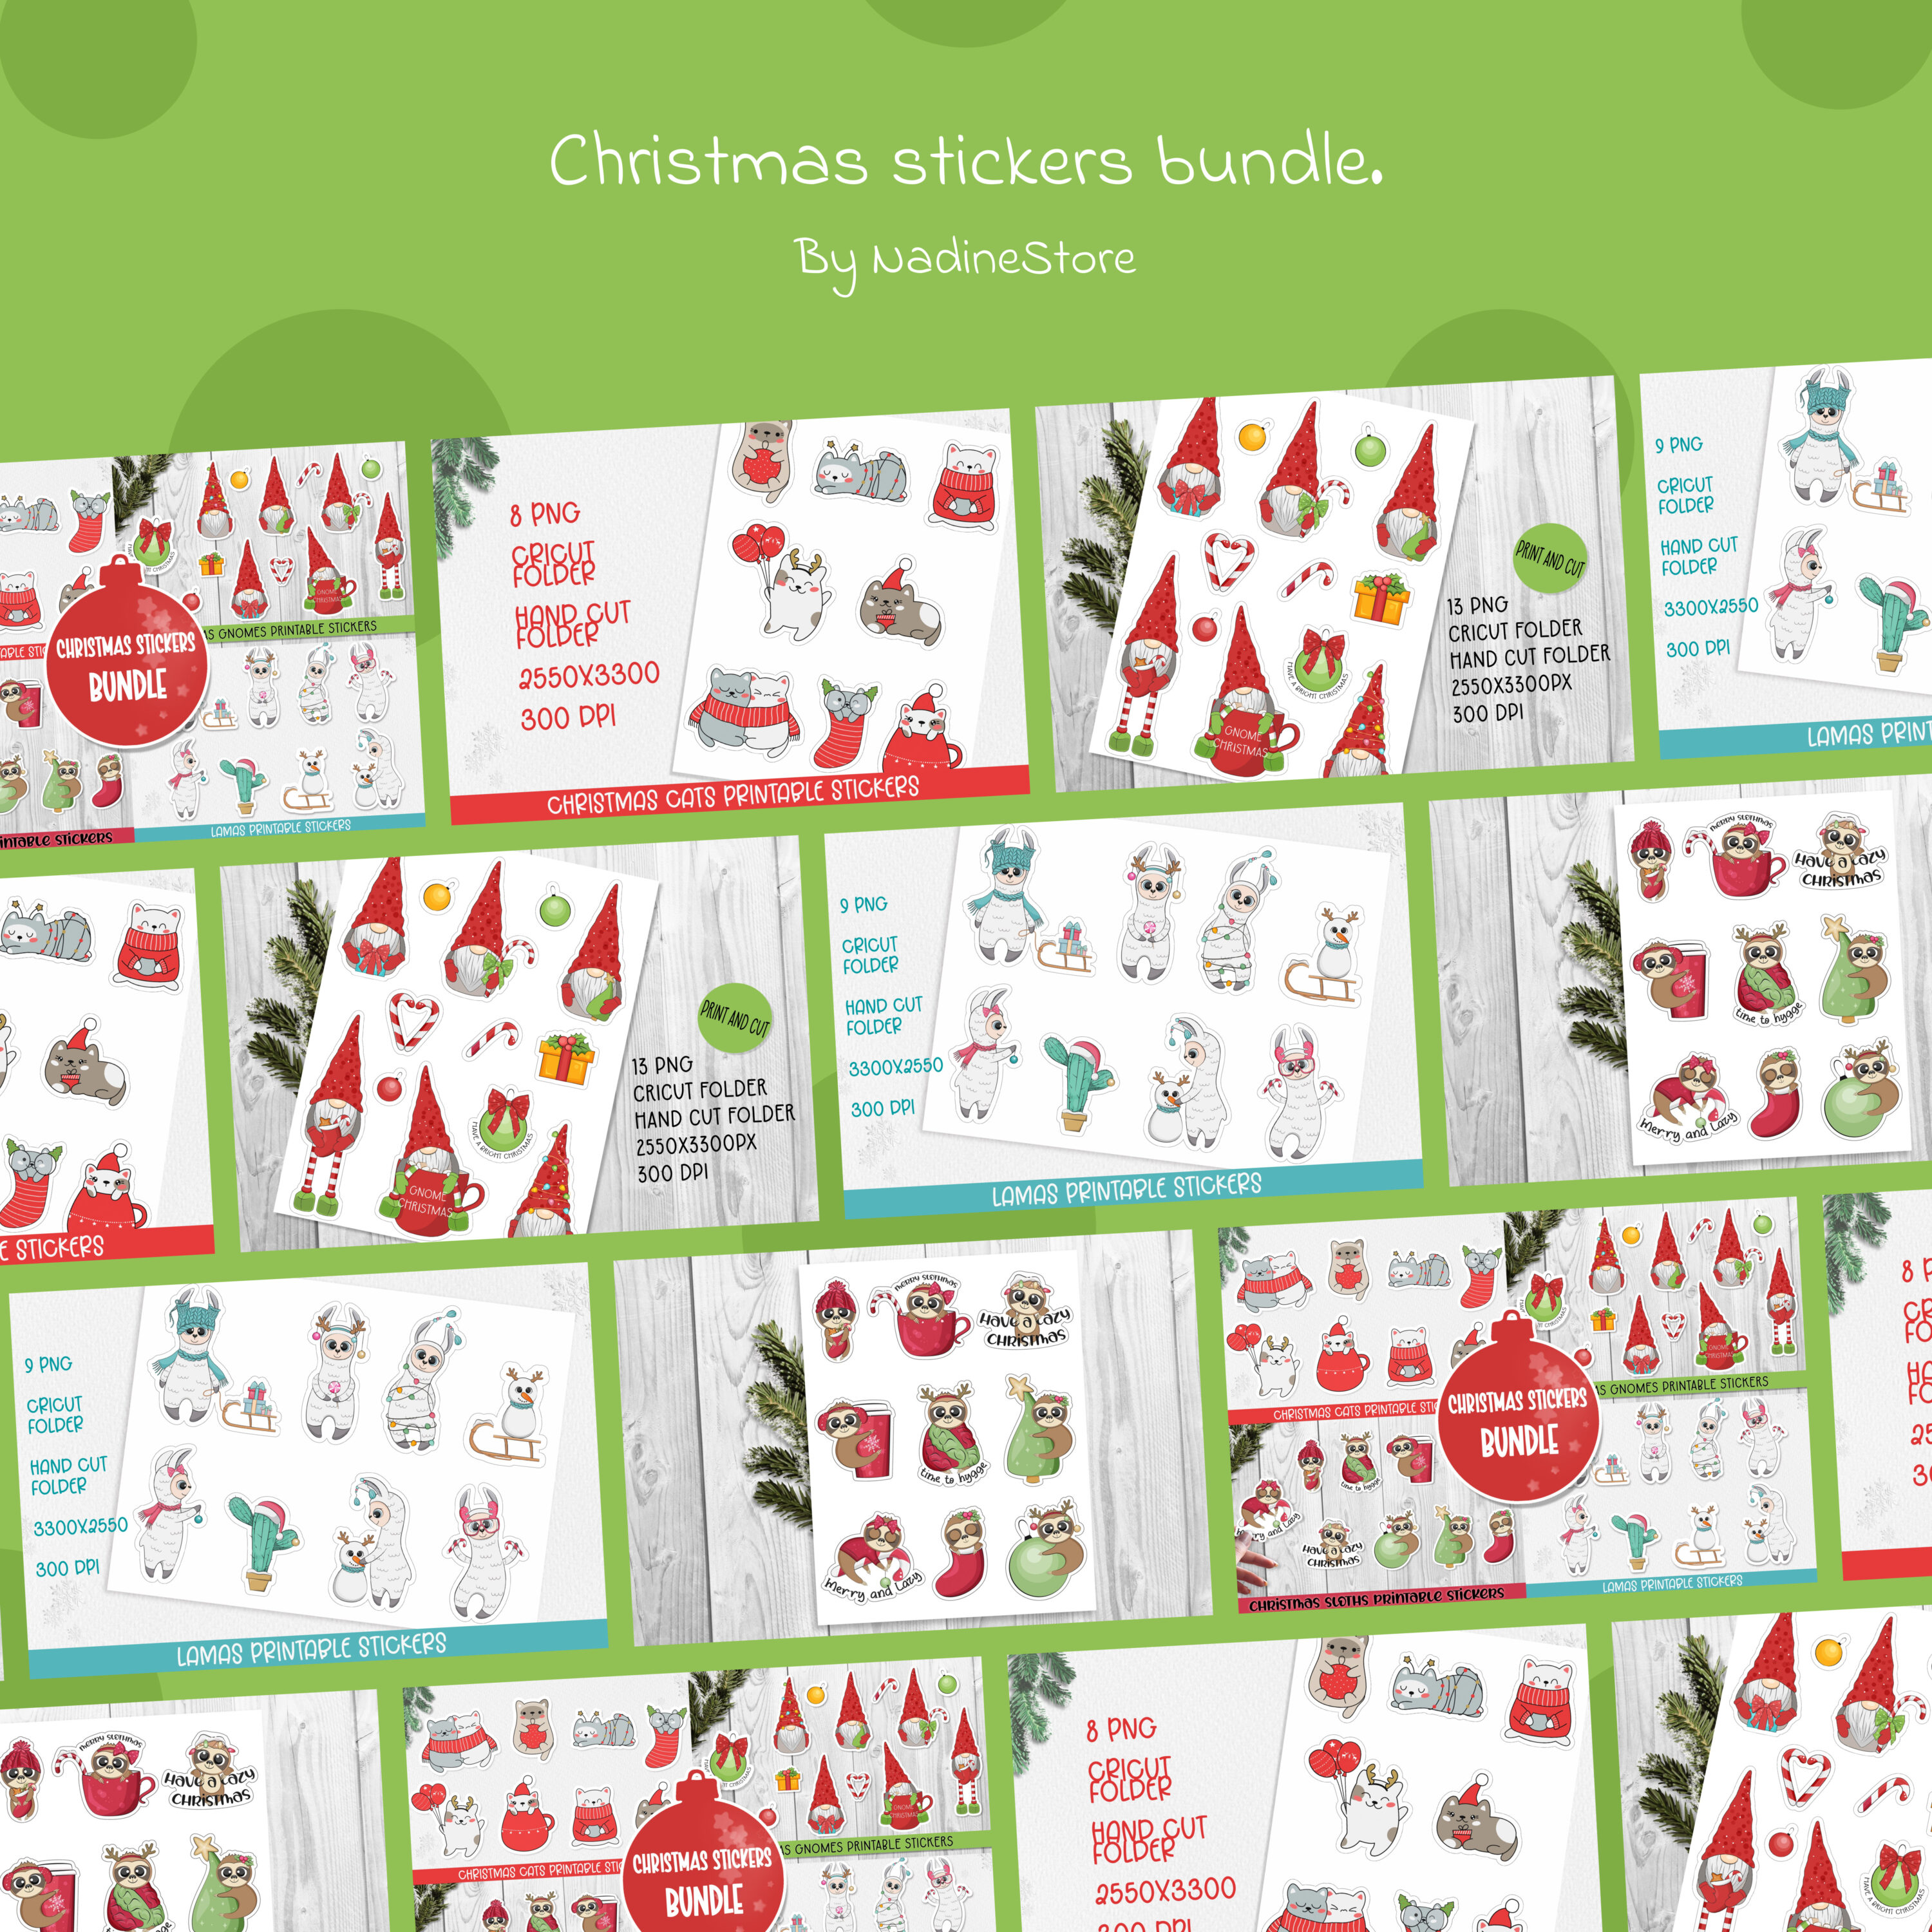 Preview christmas stickers bundle.